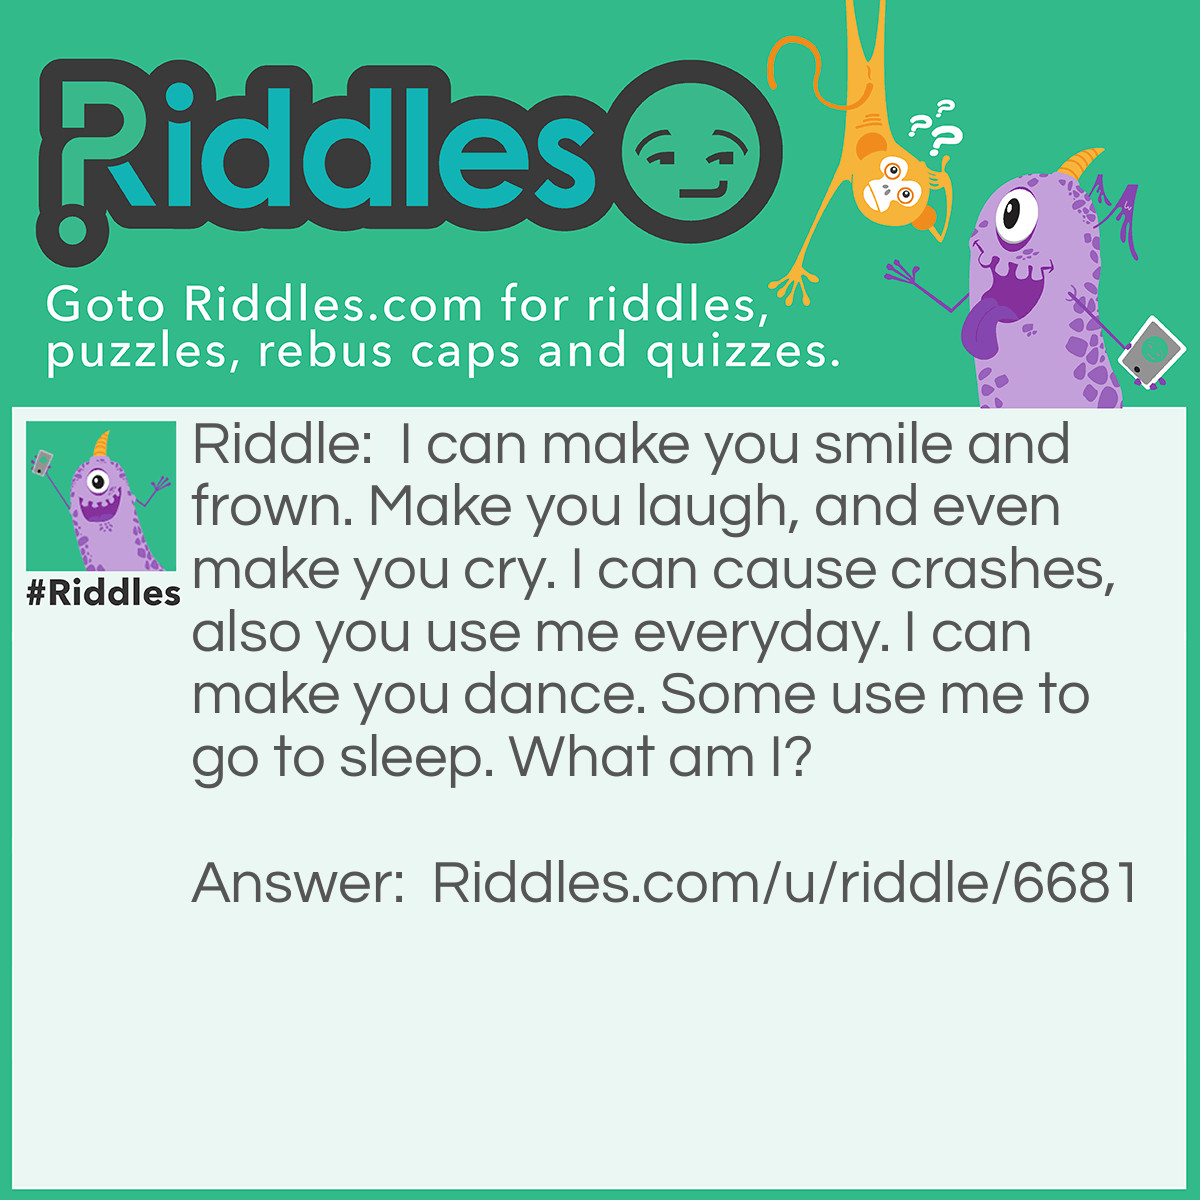 Riddle: I can make you smile and frown. Make you <a href="https://www.riddles.com/funny-riddles">laugh</a>, and even make you cry. I can cause crashes, also you use me every day. I can make you dance. Some use me to go to sleep. What am I? Answer: Your smart phone!